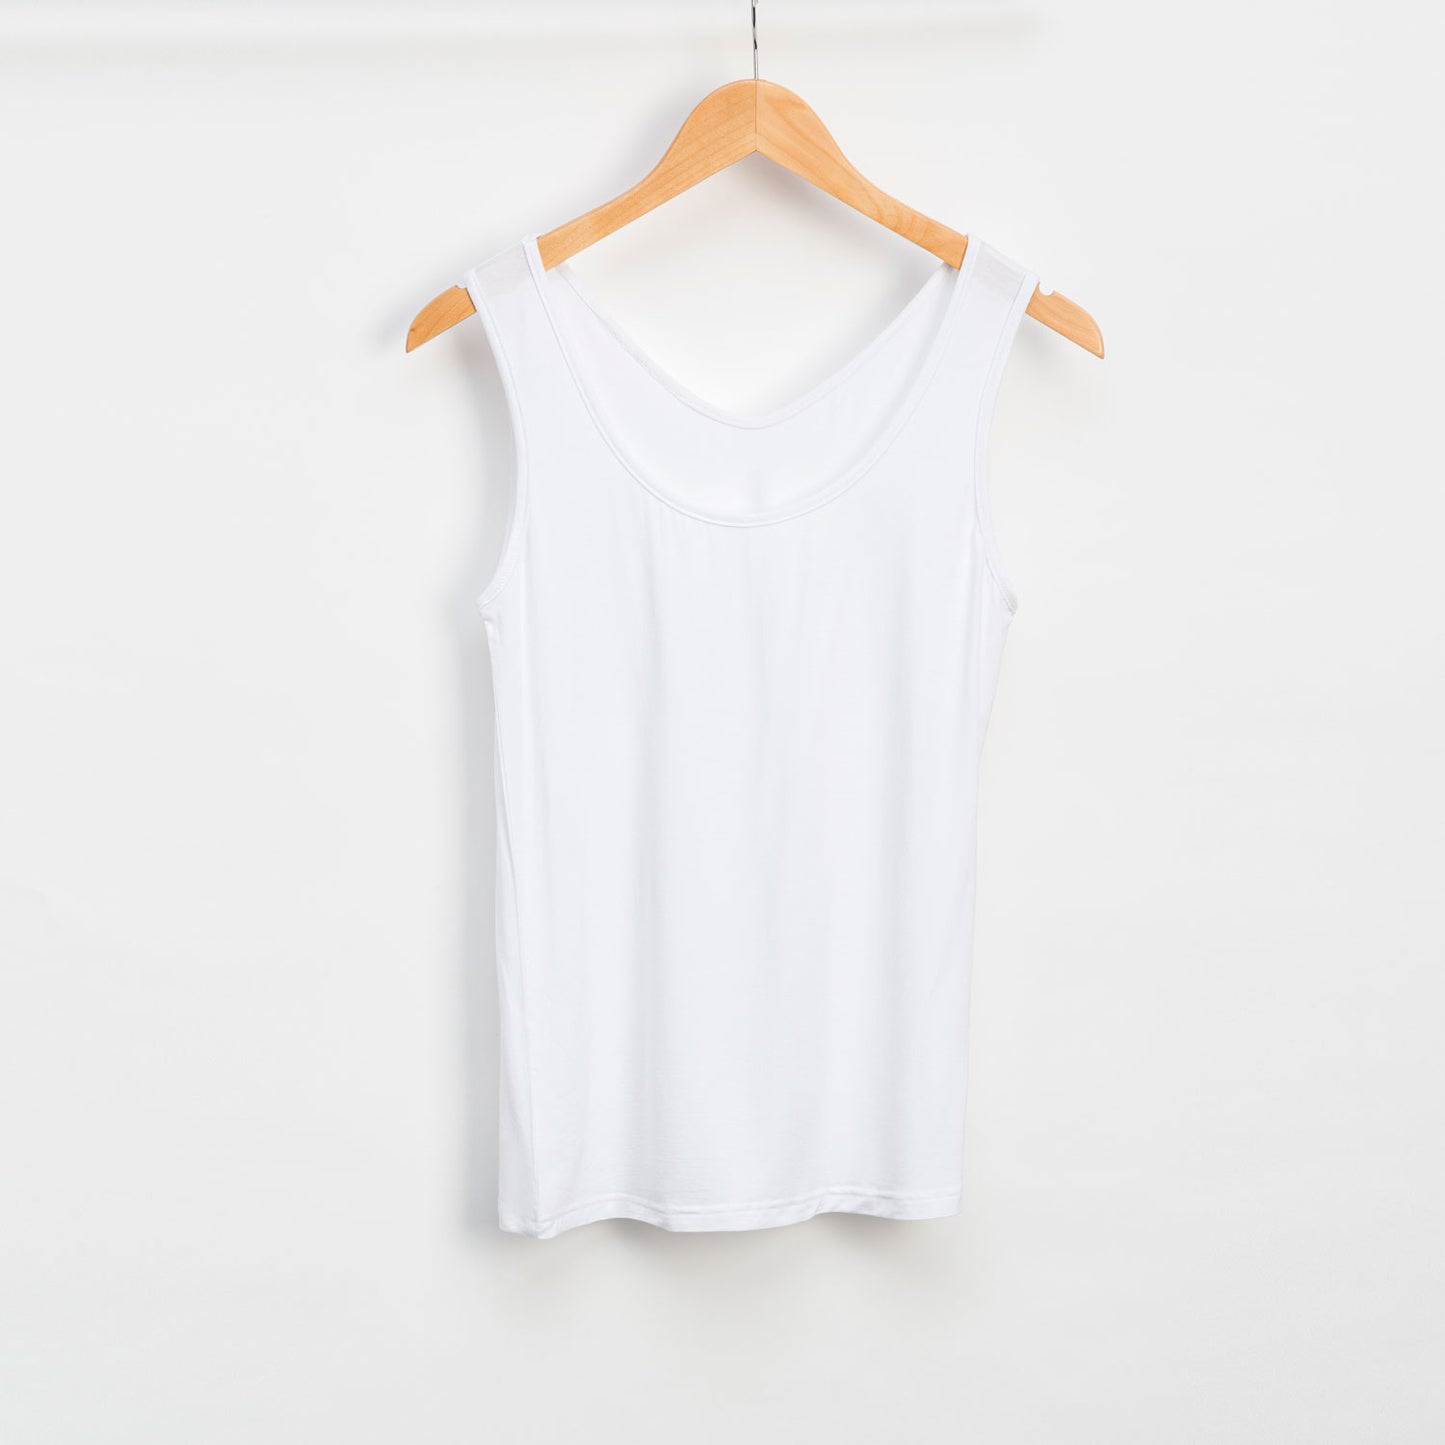 Audrey Reversible Scoop Neck and V-Neck Stretch Tank Top